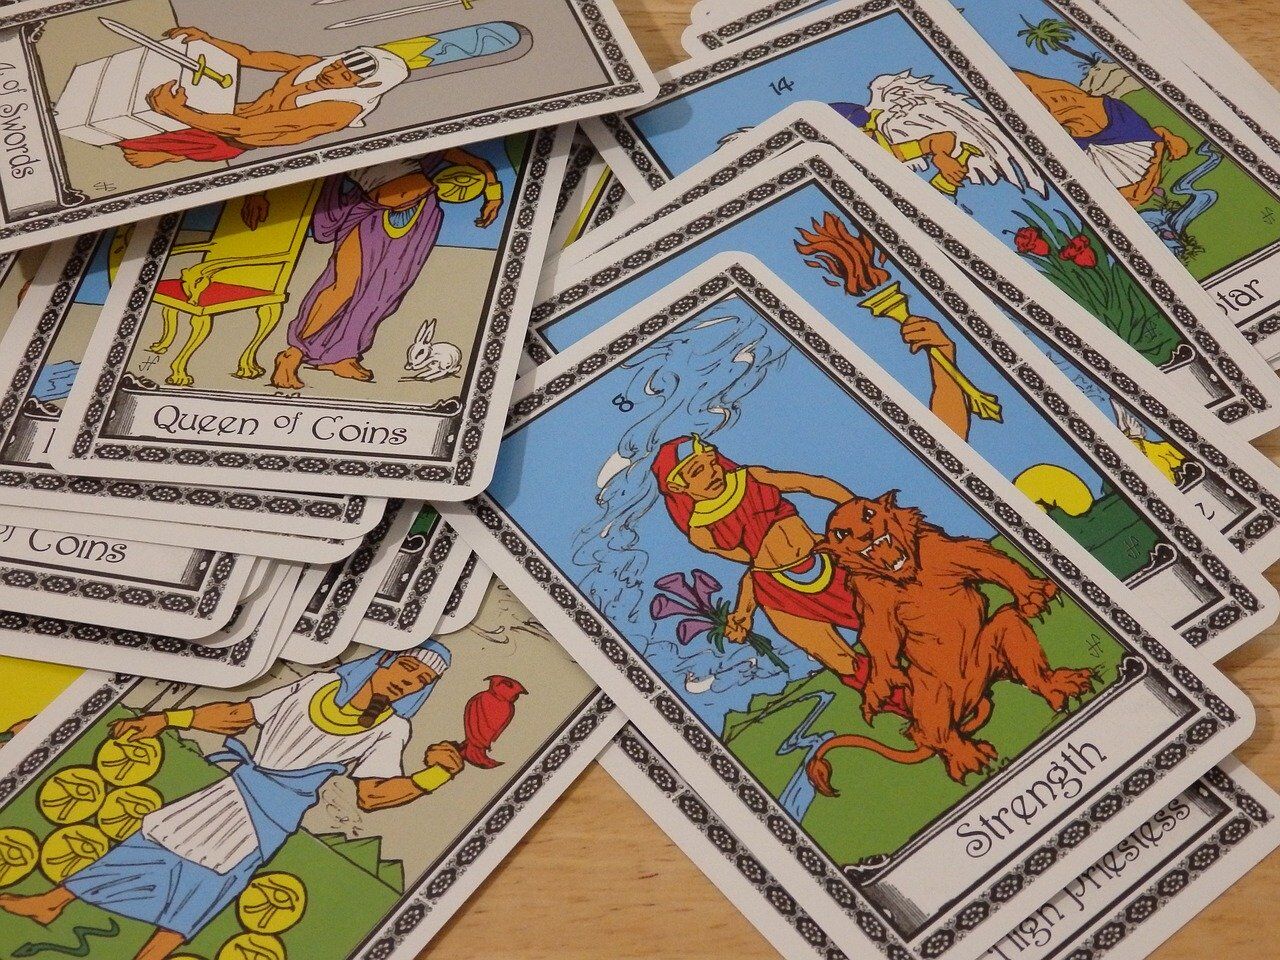 Card Readings Online: 10 Websites To Get an Accurate Tarot Card Reading for Free | Card Games | sfweekly.com